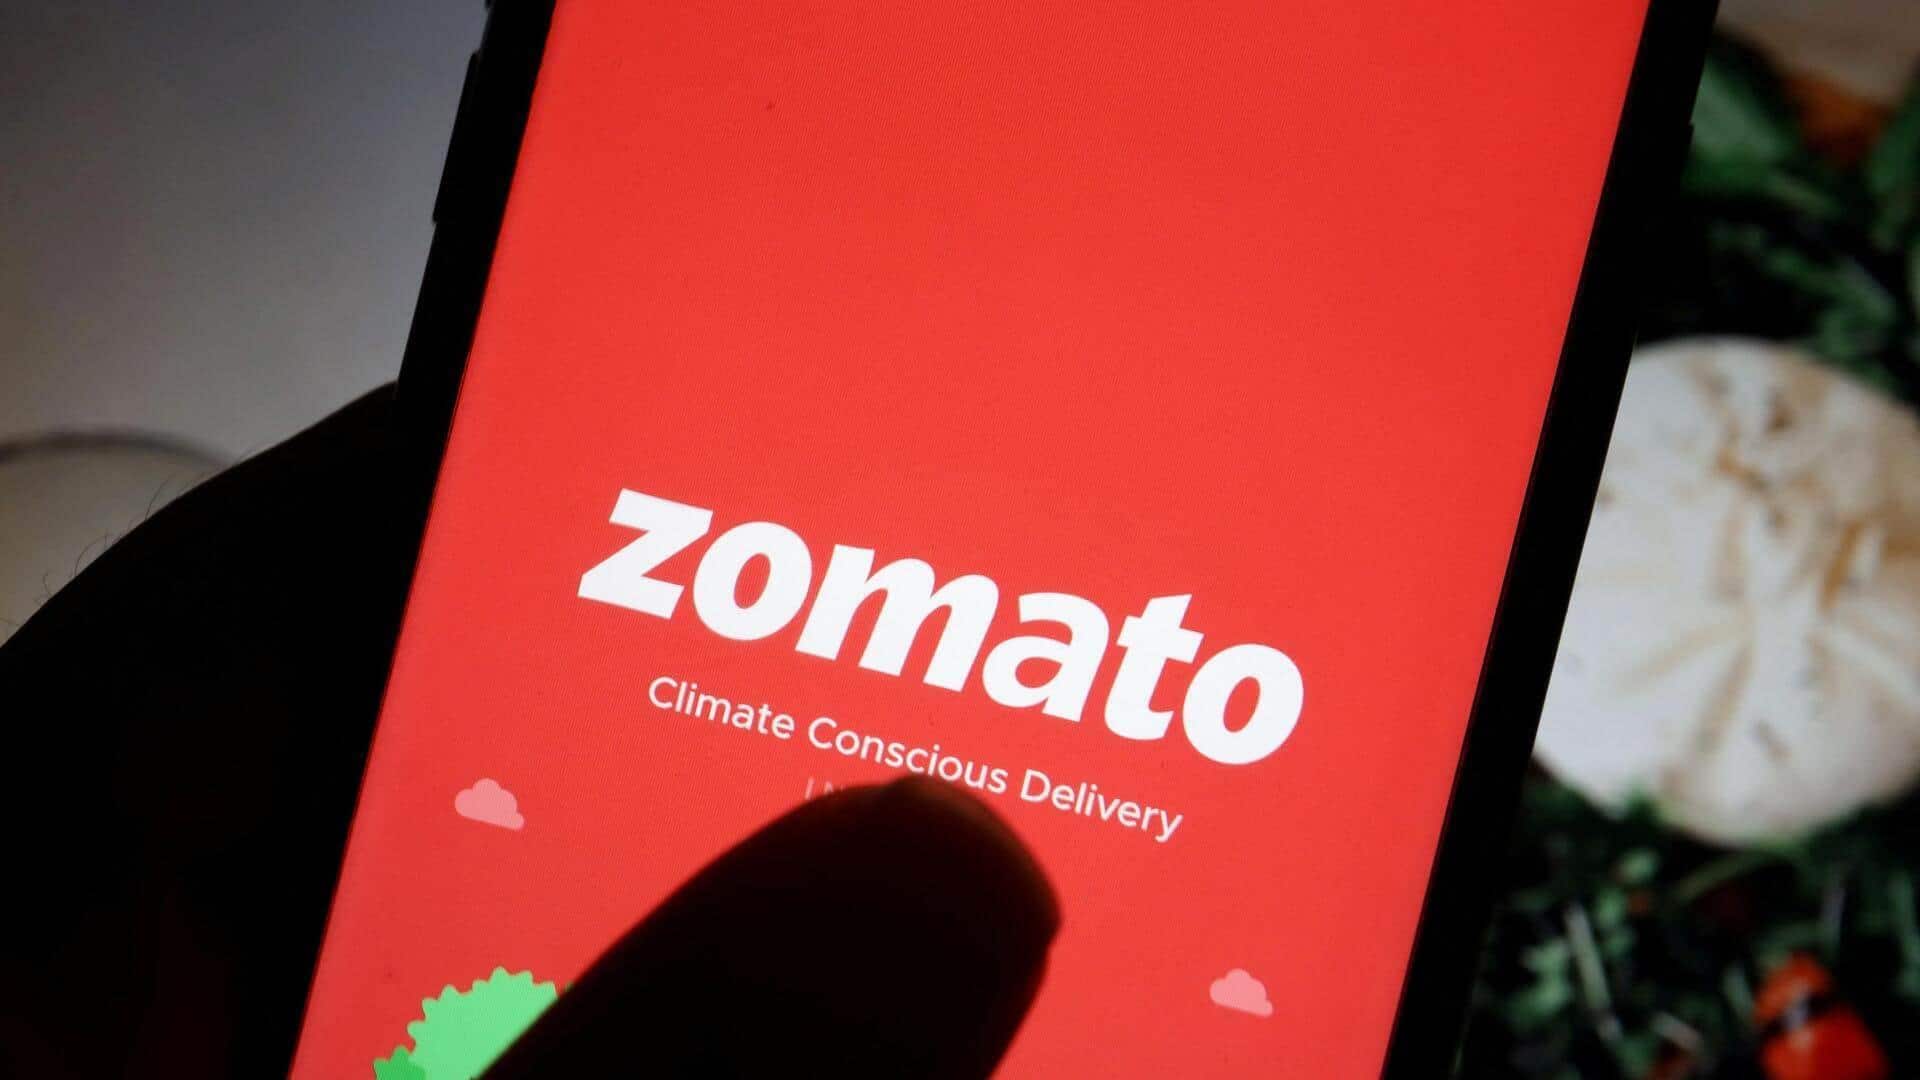 Why Zomato shares declined today to end 5-day rally